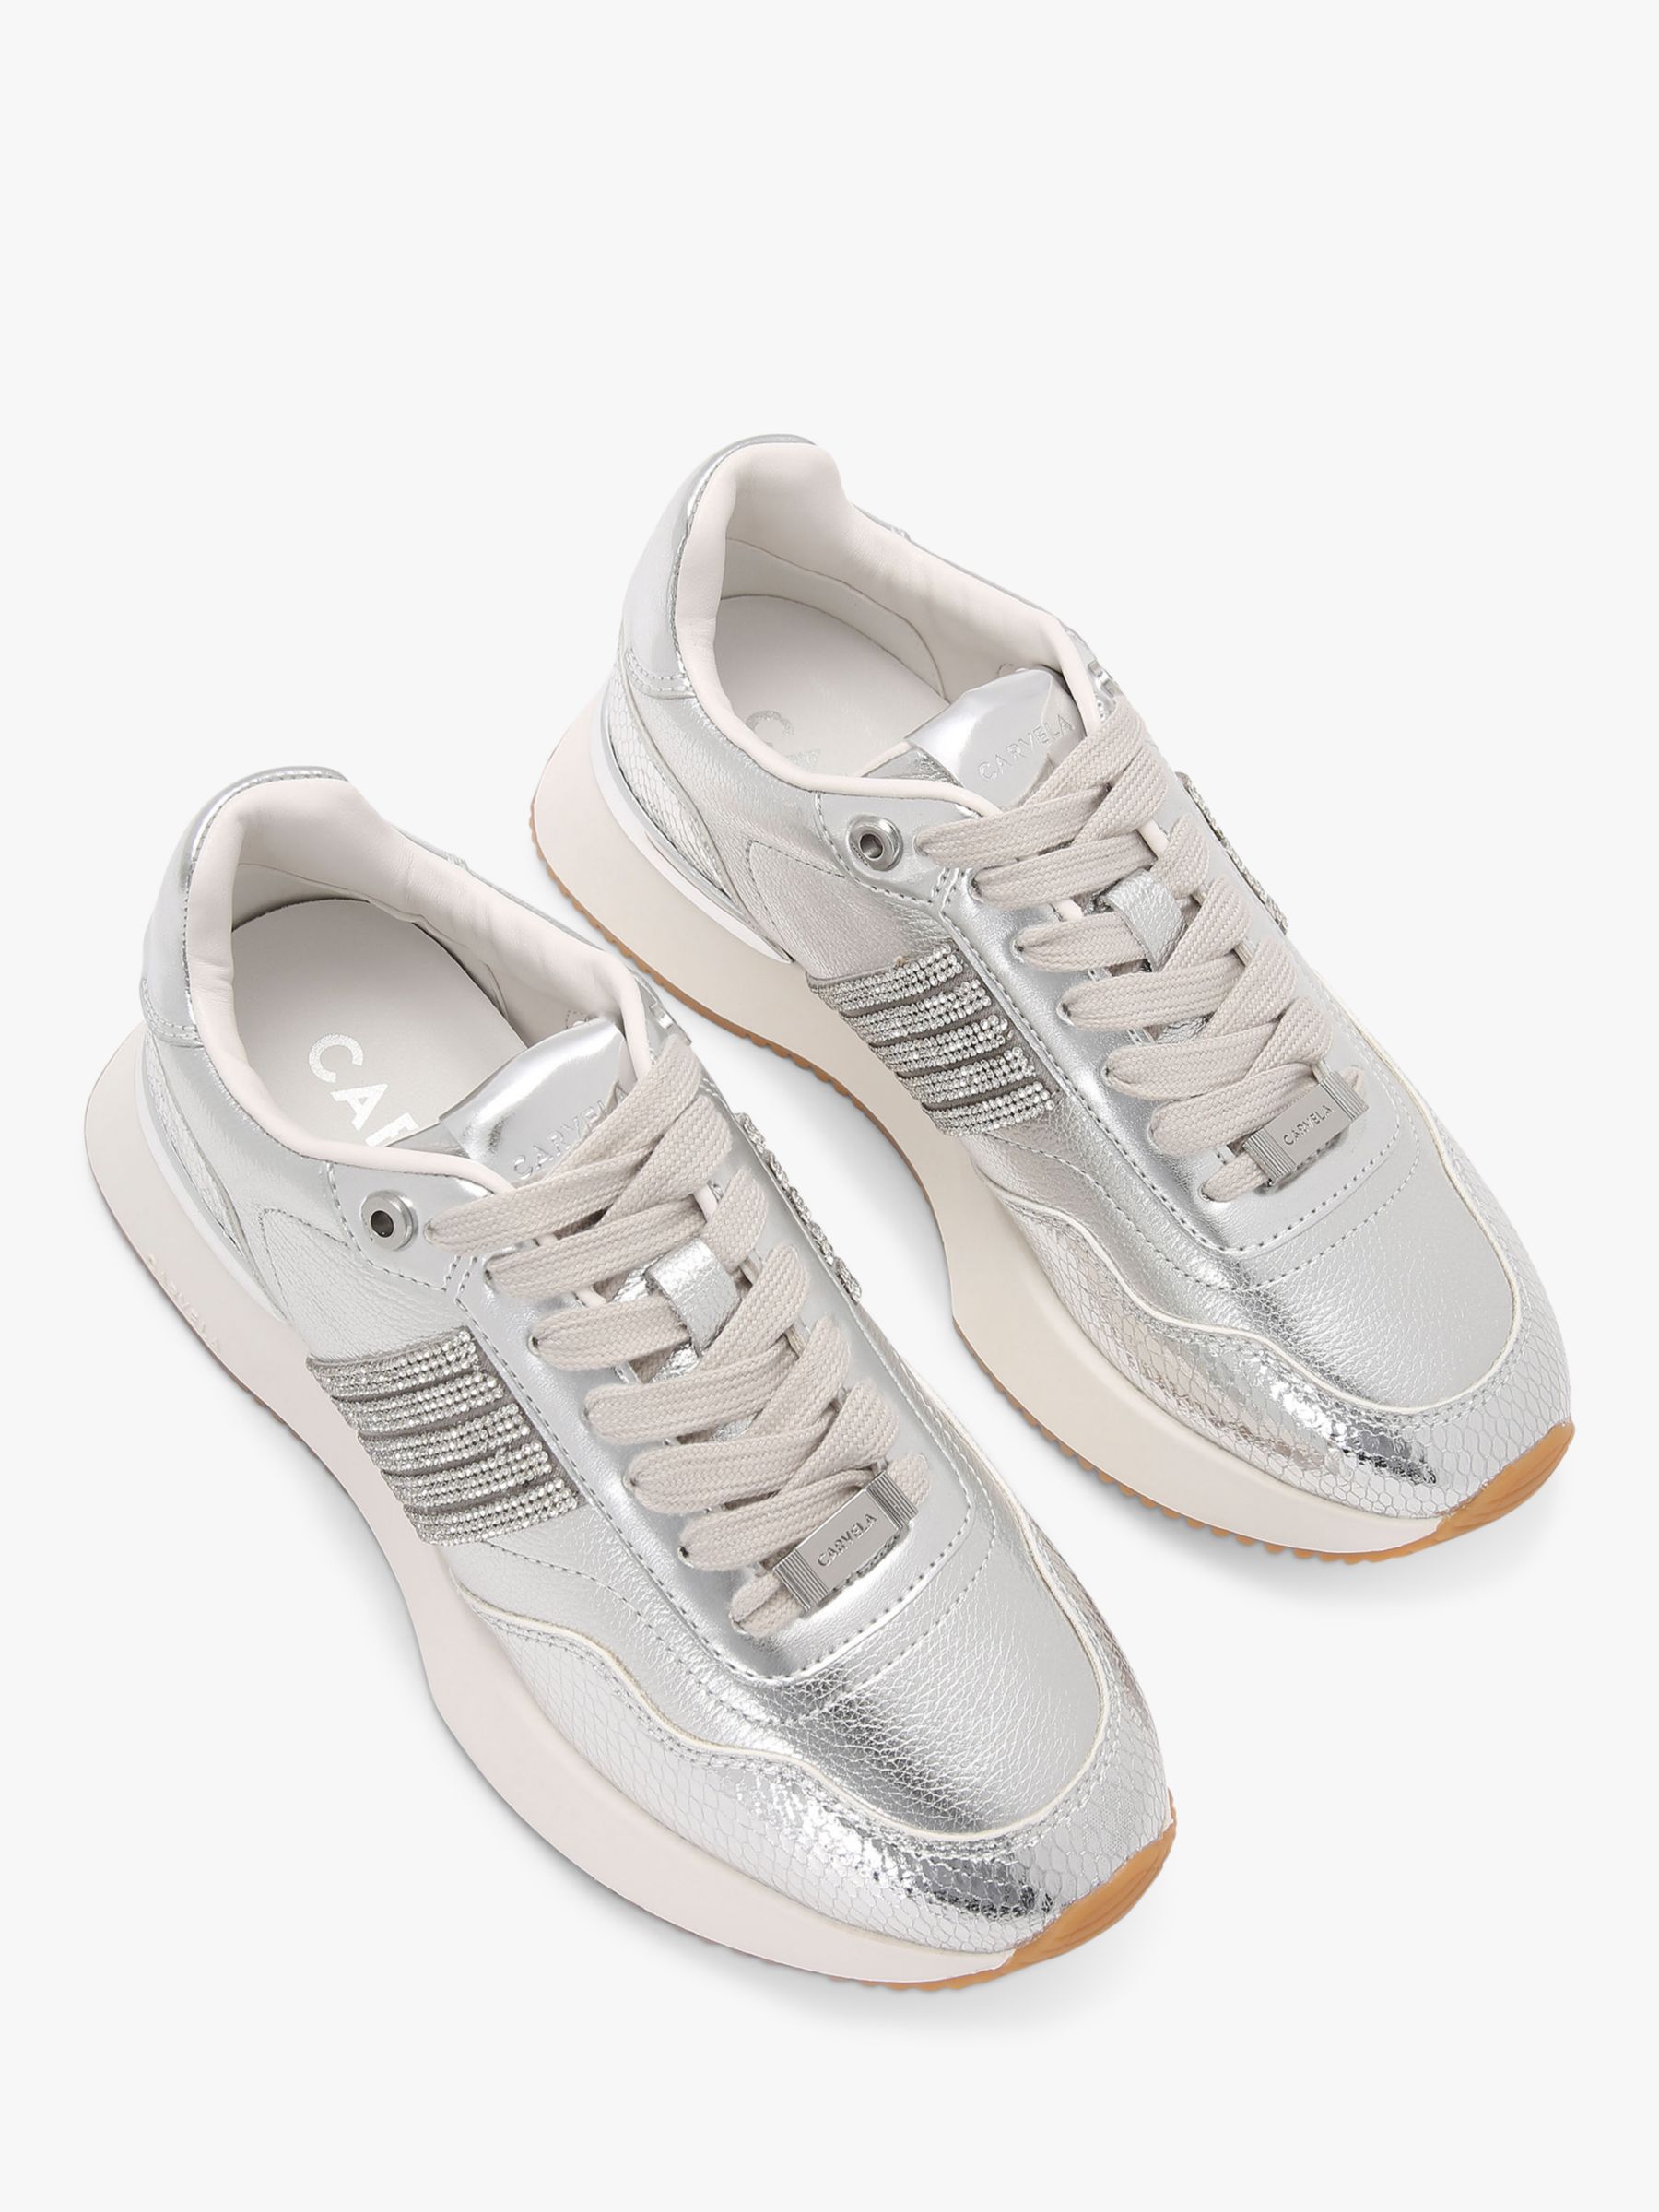 Buy Carvela Flare Paparazzi Embellished Leather Trainers, Silver Online at johnlewis.com